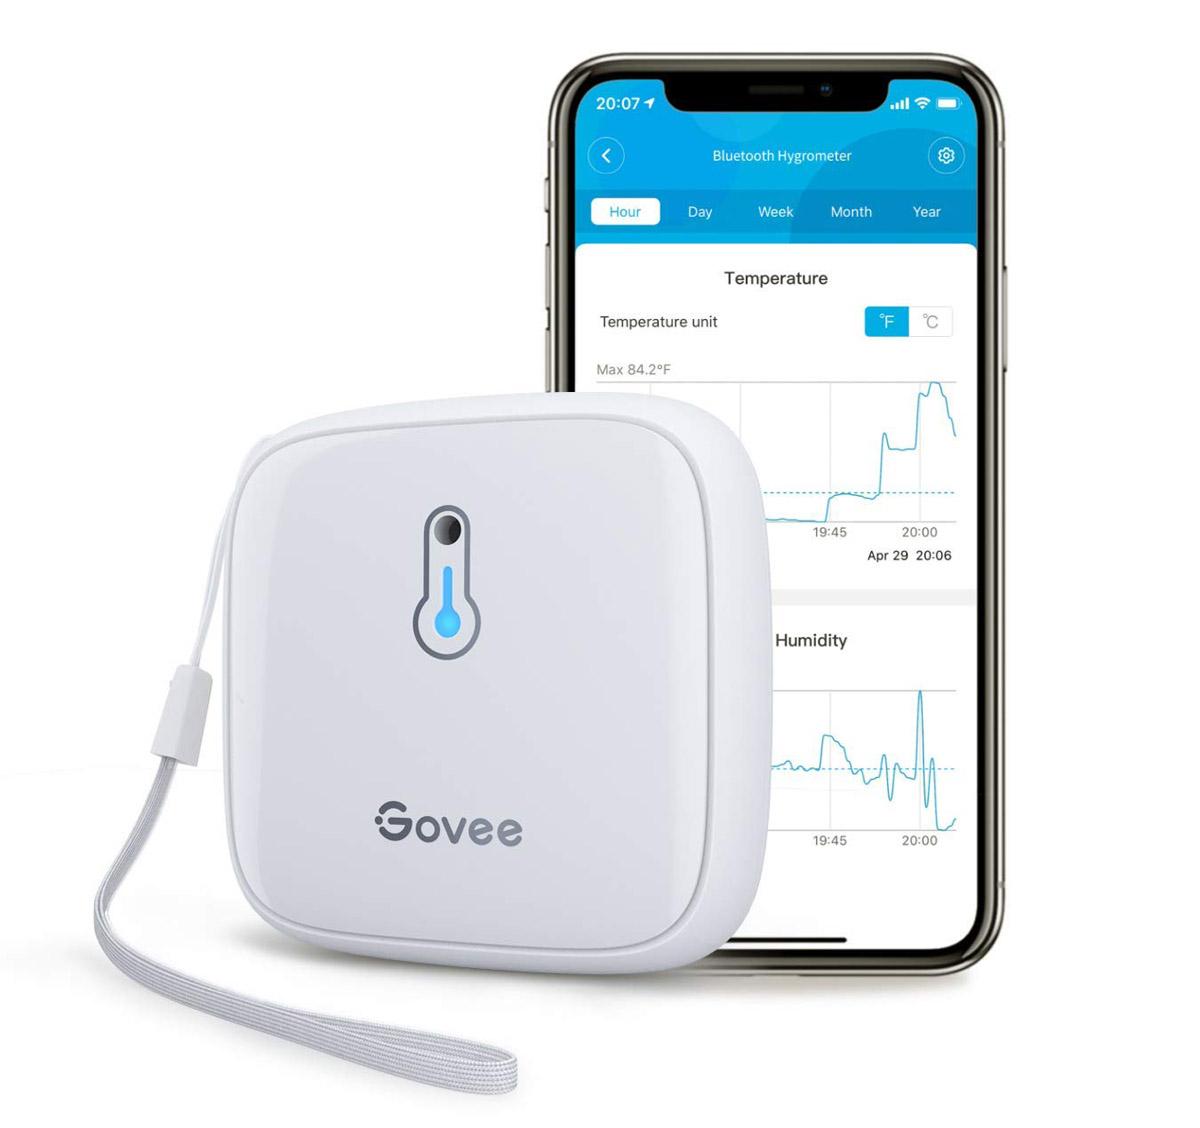 Govee Bluetooth Smart App Mini Hygrometer Thermometer for $10.99